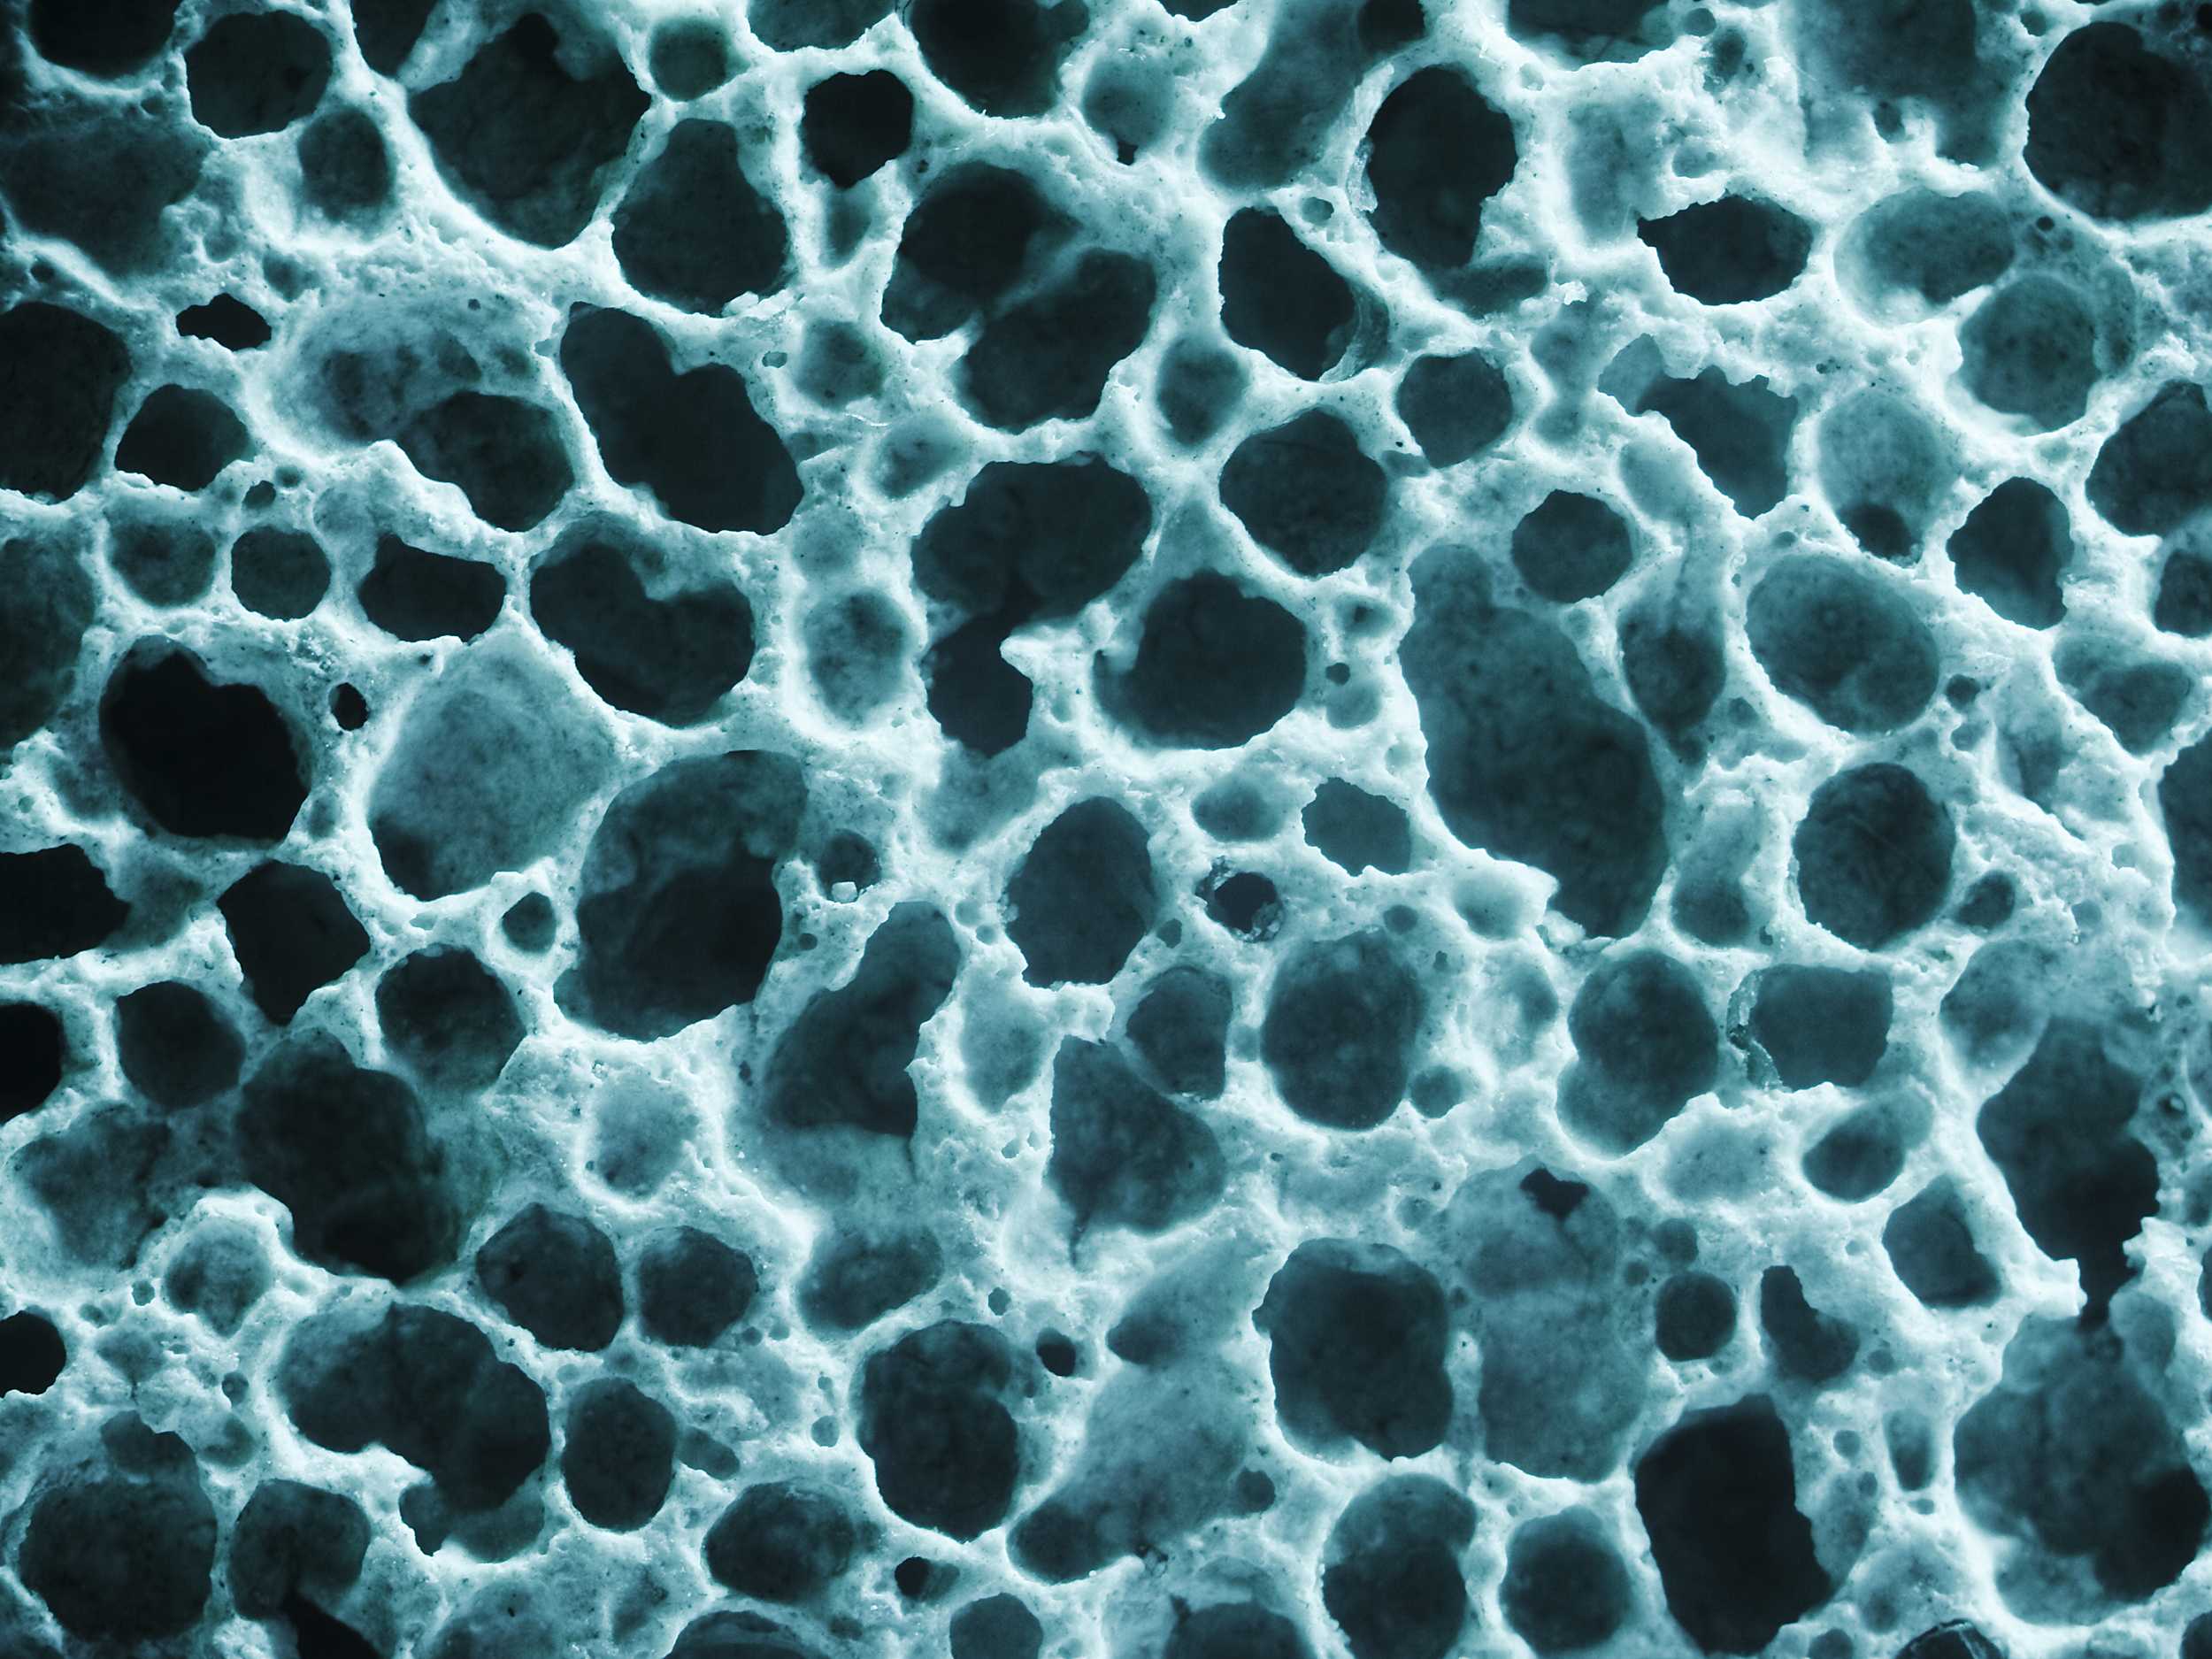 Bone cell structure